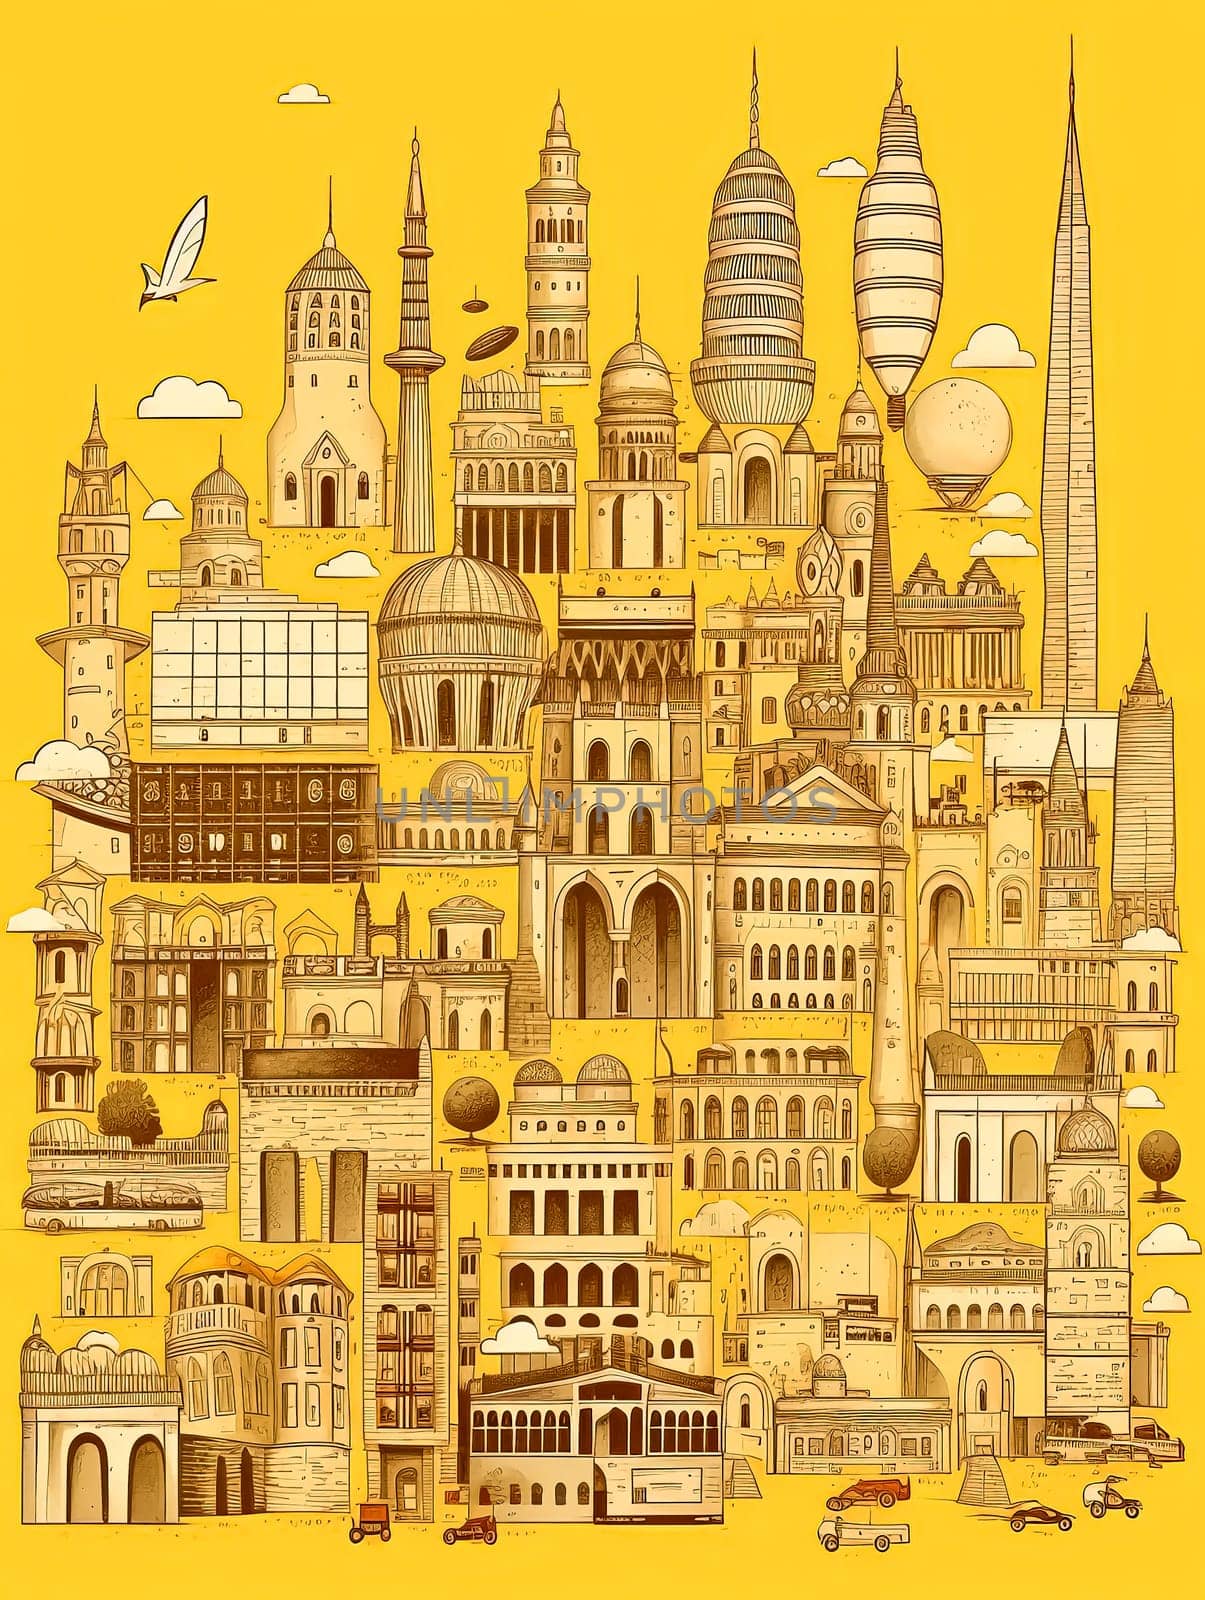 A yellow poster with many buildings and a boat. The poster is titled "Cityscape". The poster is meant to showcase the diversity of architecture